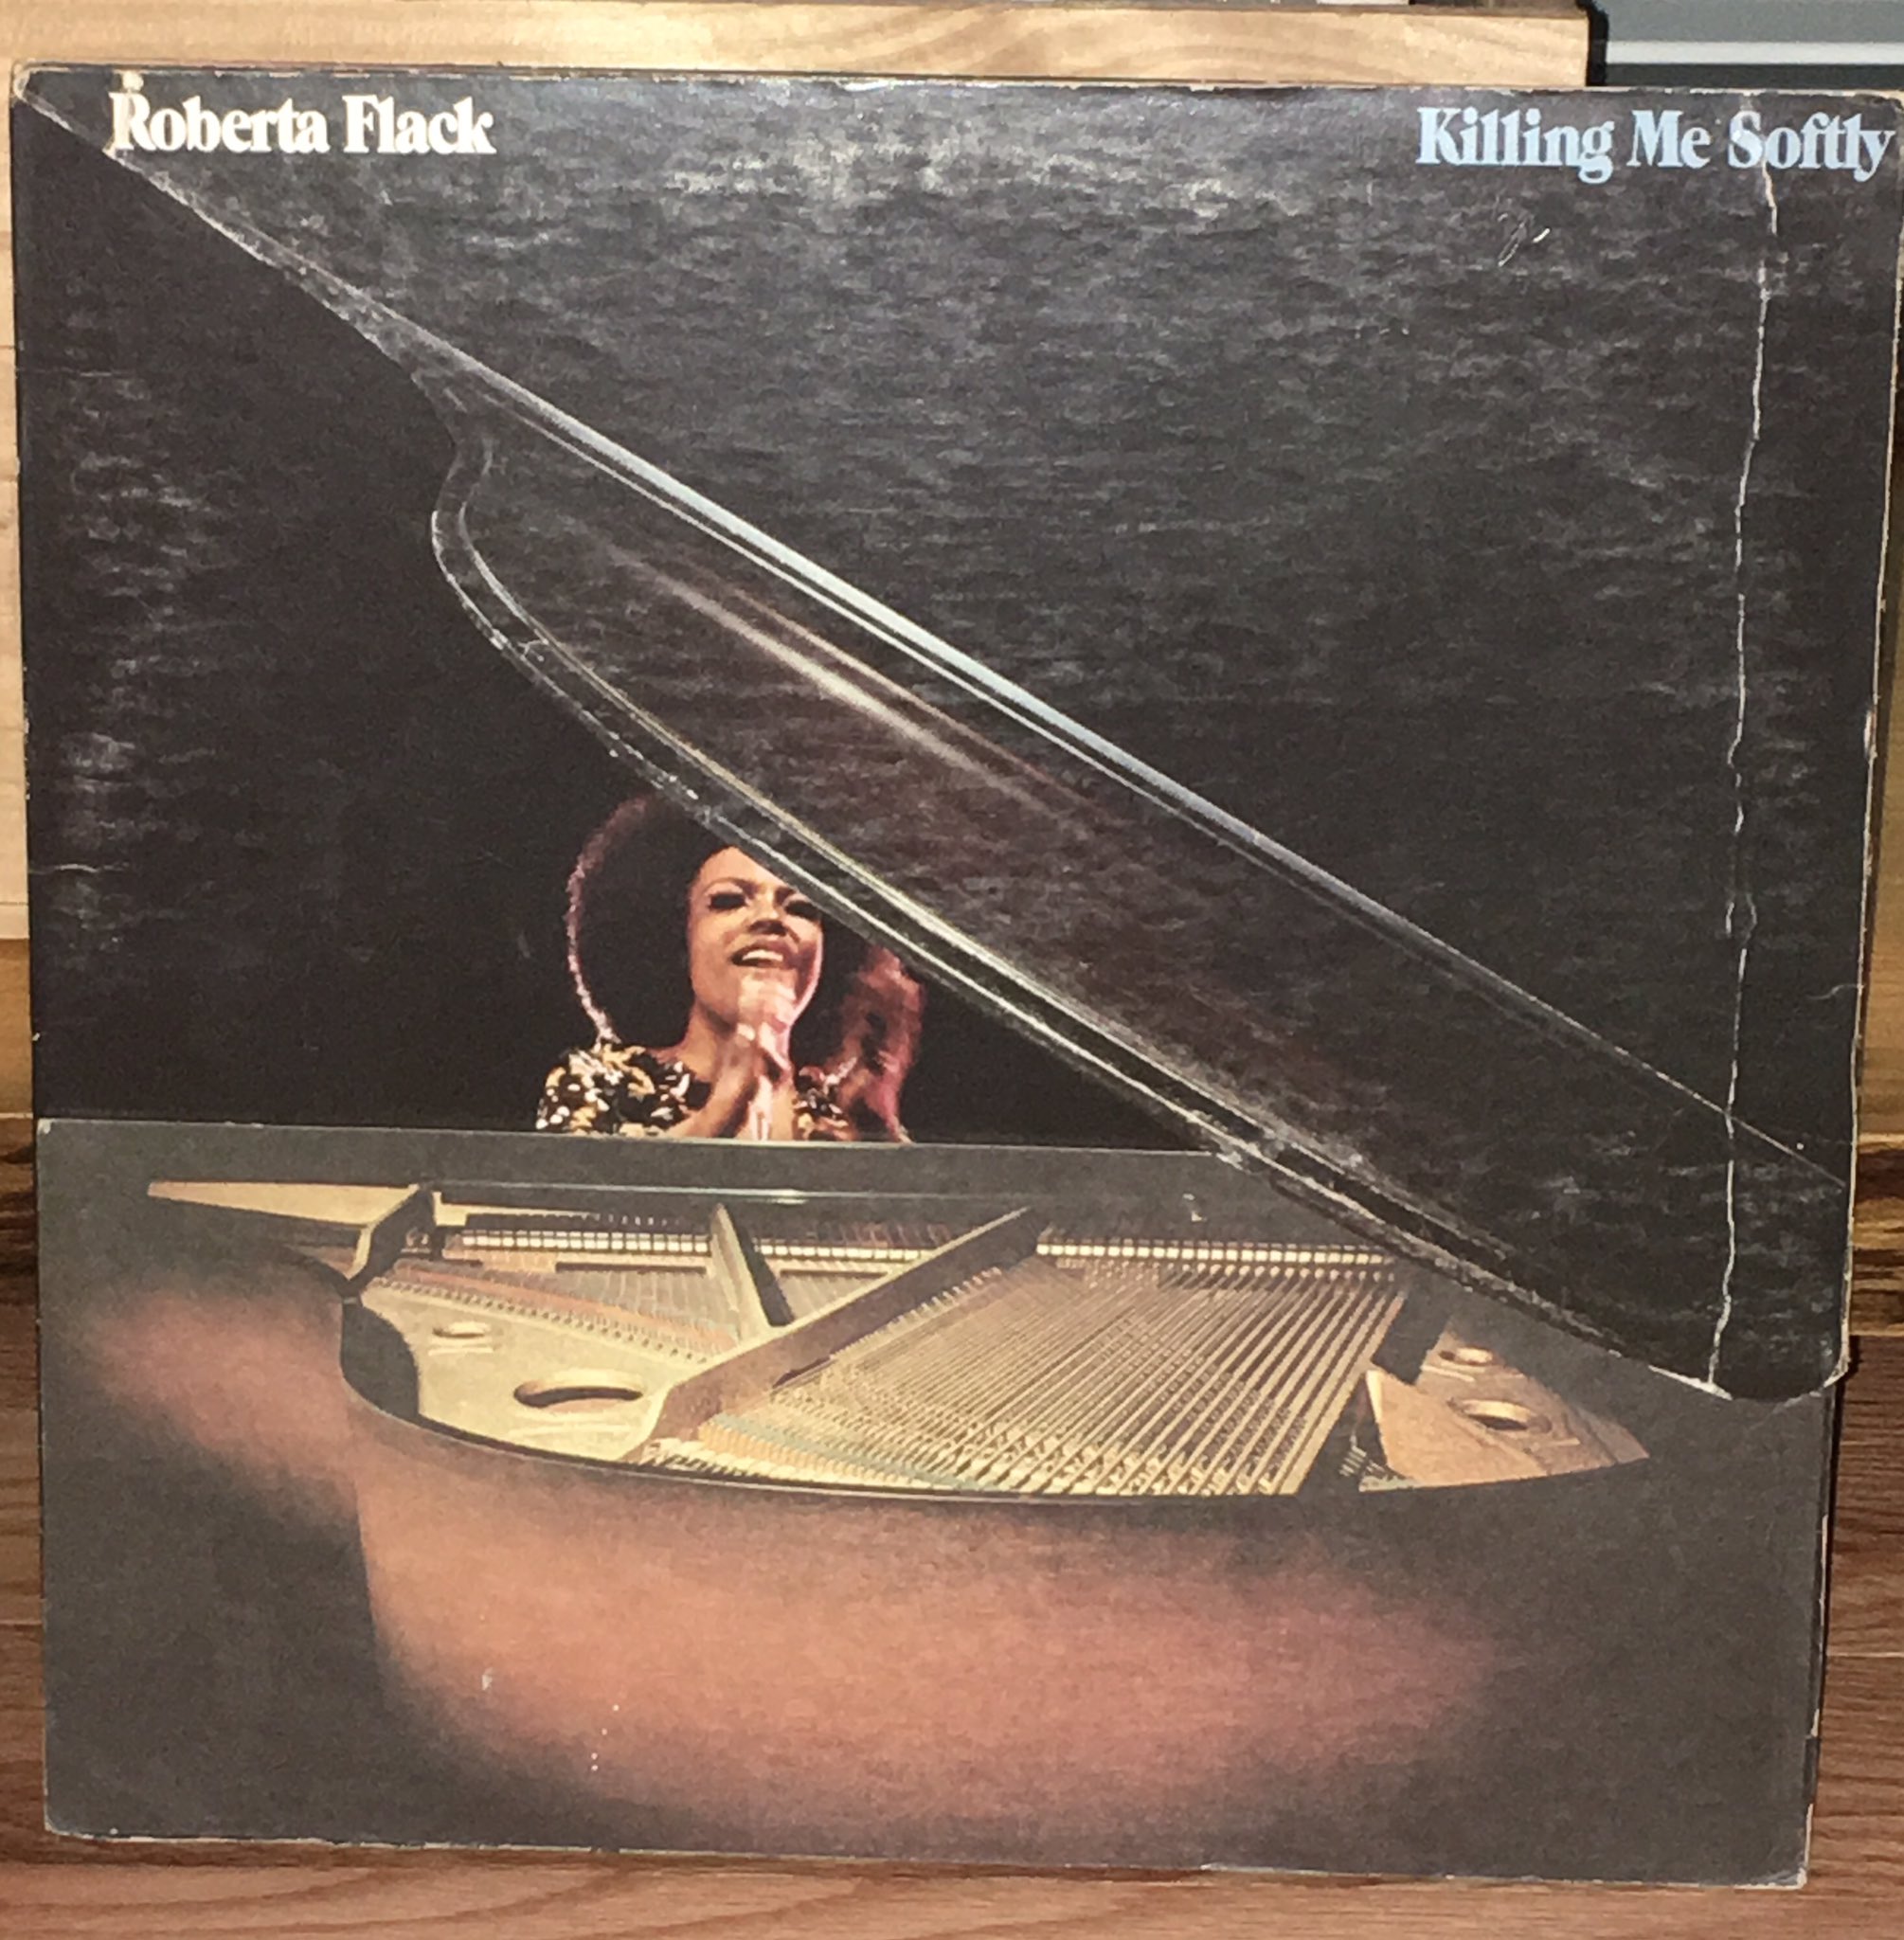 Happy birthday Roberta Flack. 
Thanks for the music and one of the coolest album covers ever. 